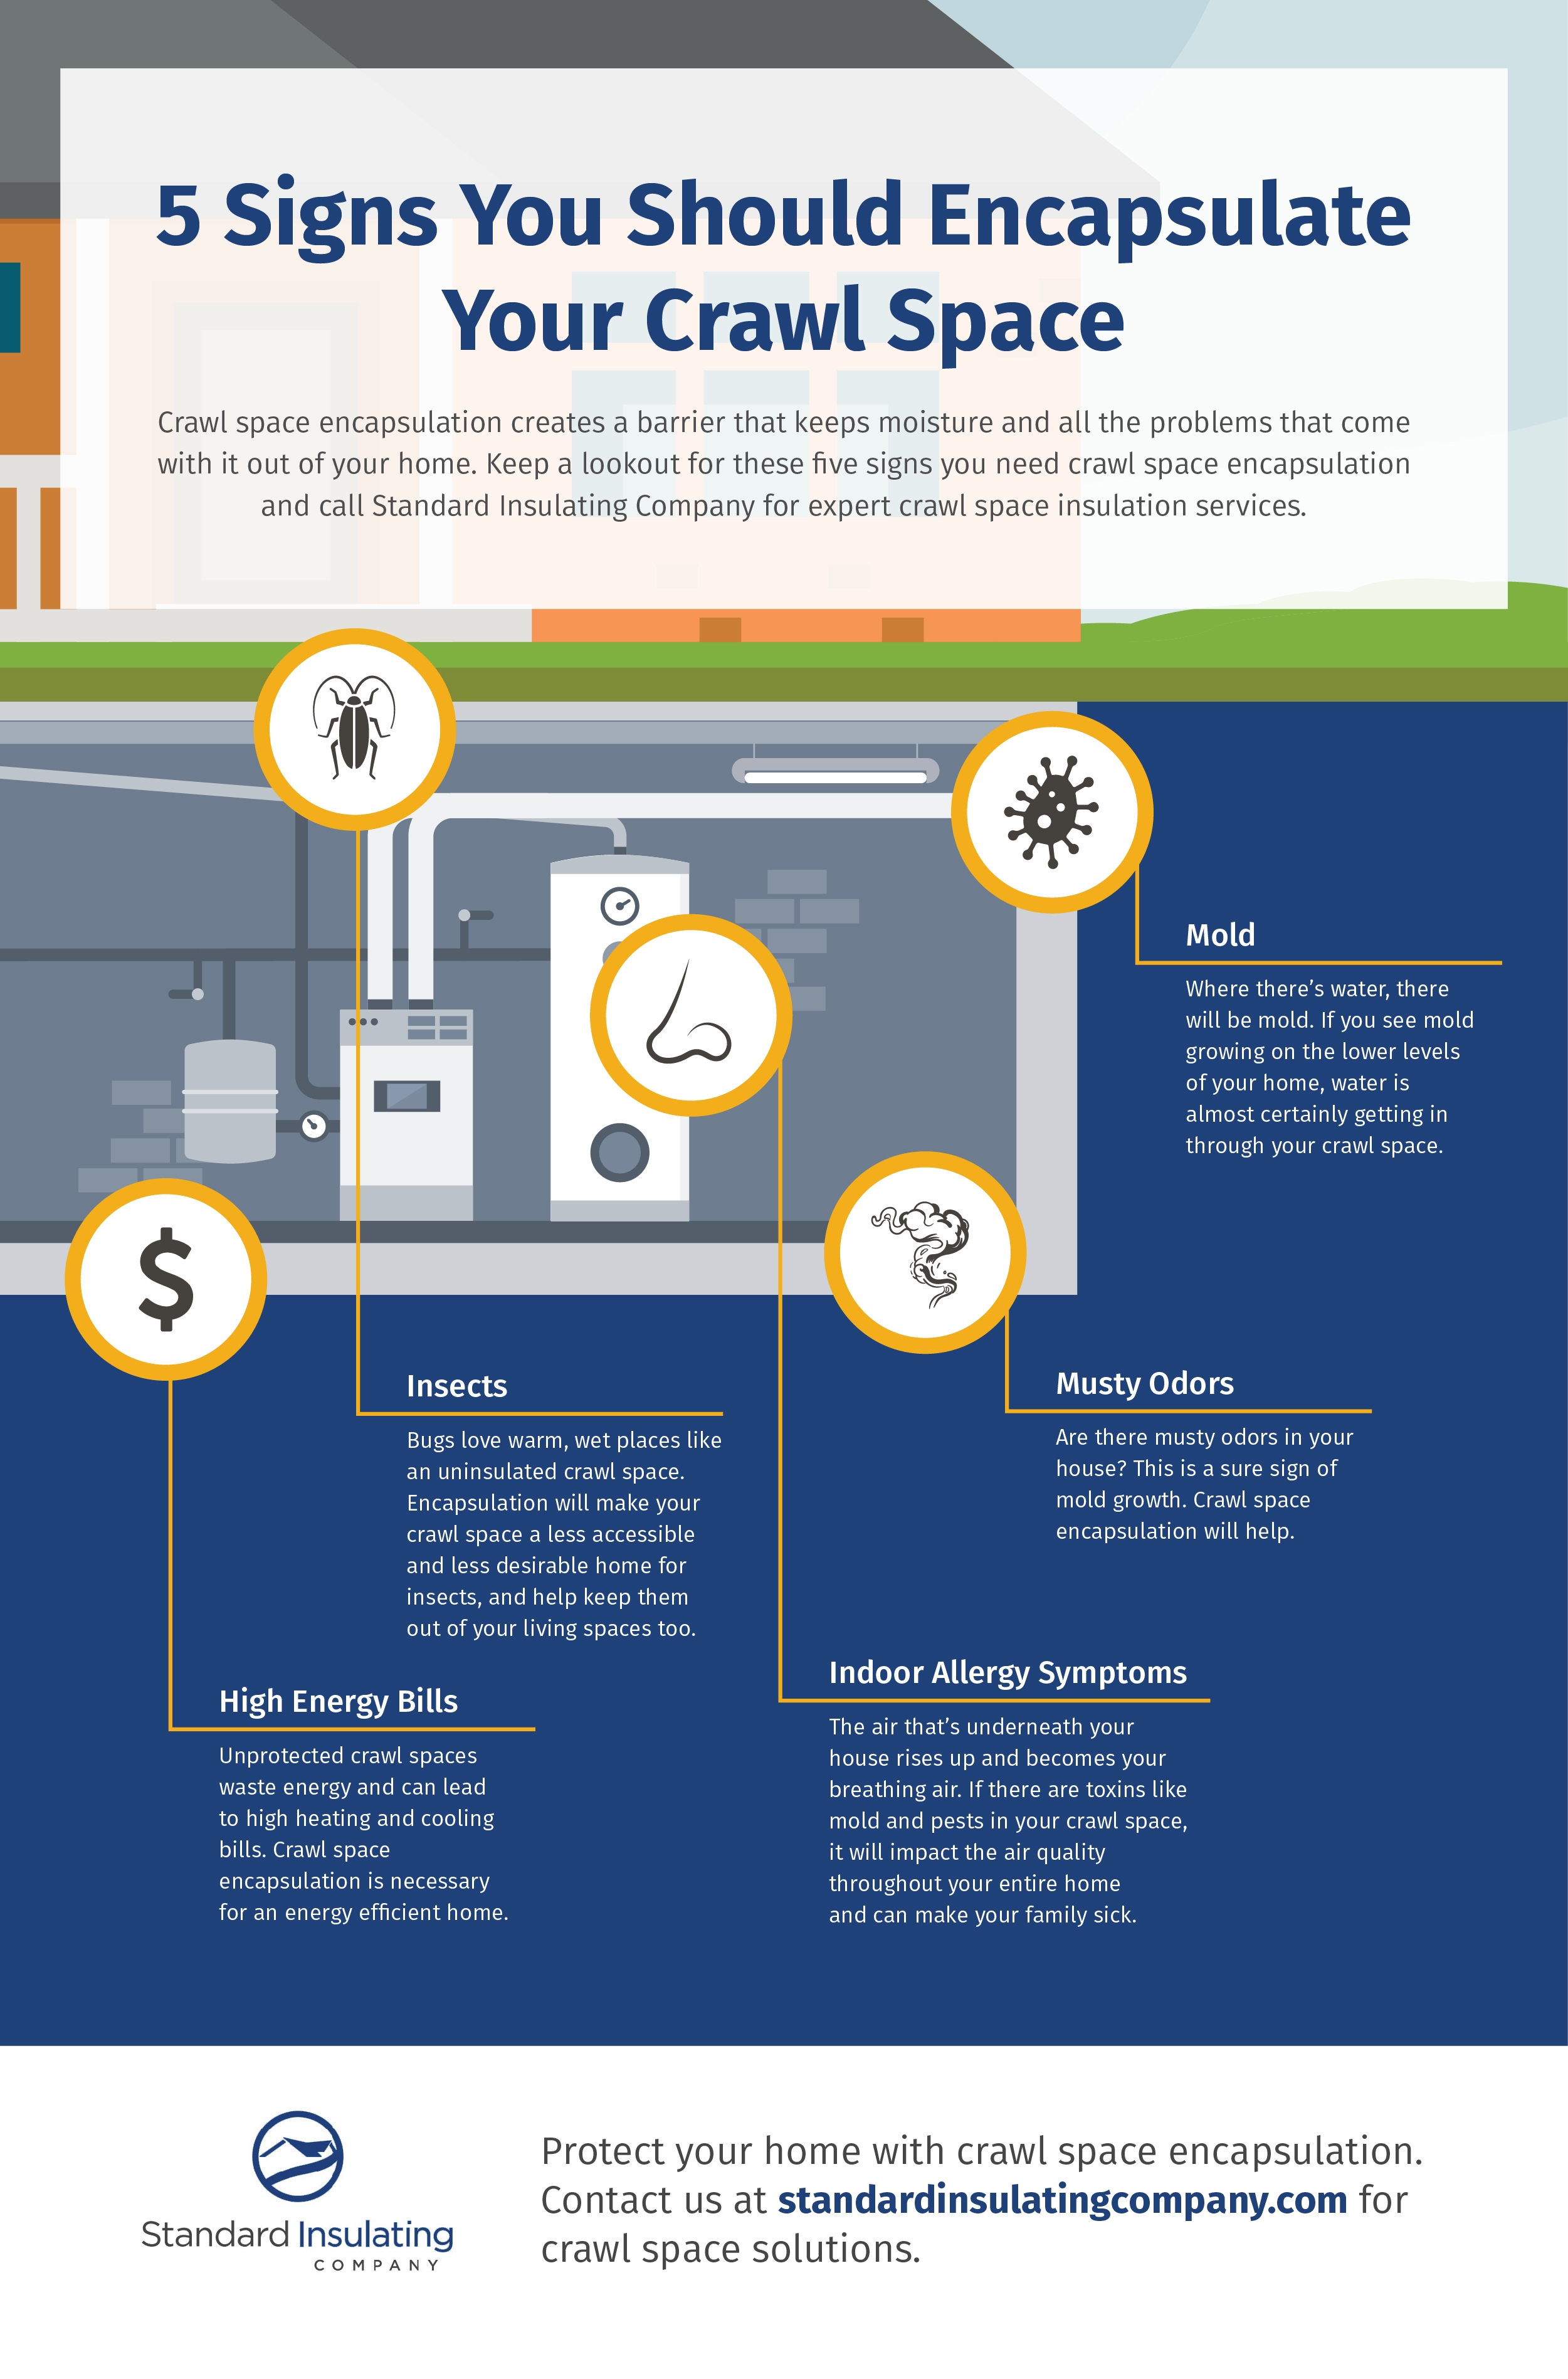 5 Signs You Should Encapsulate Your Crawl Space infographic